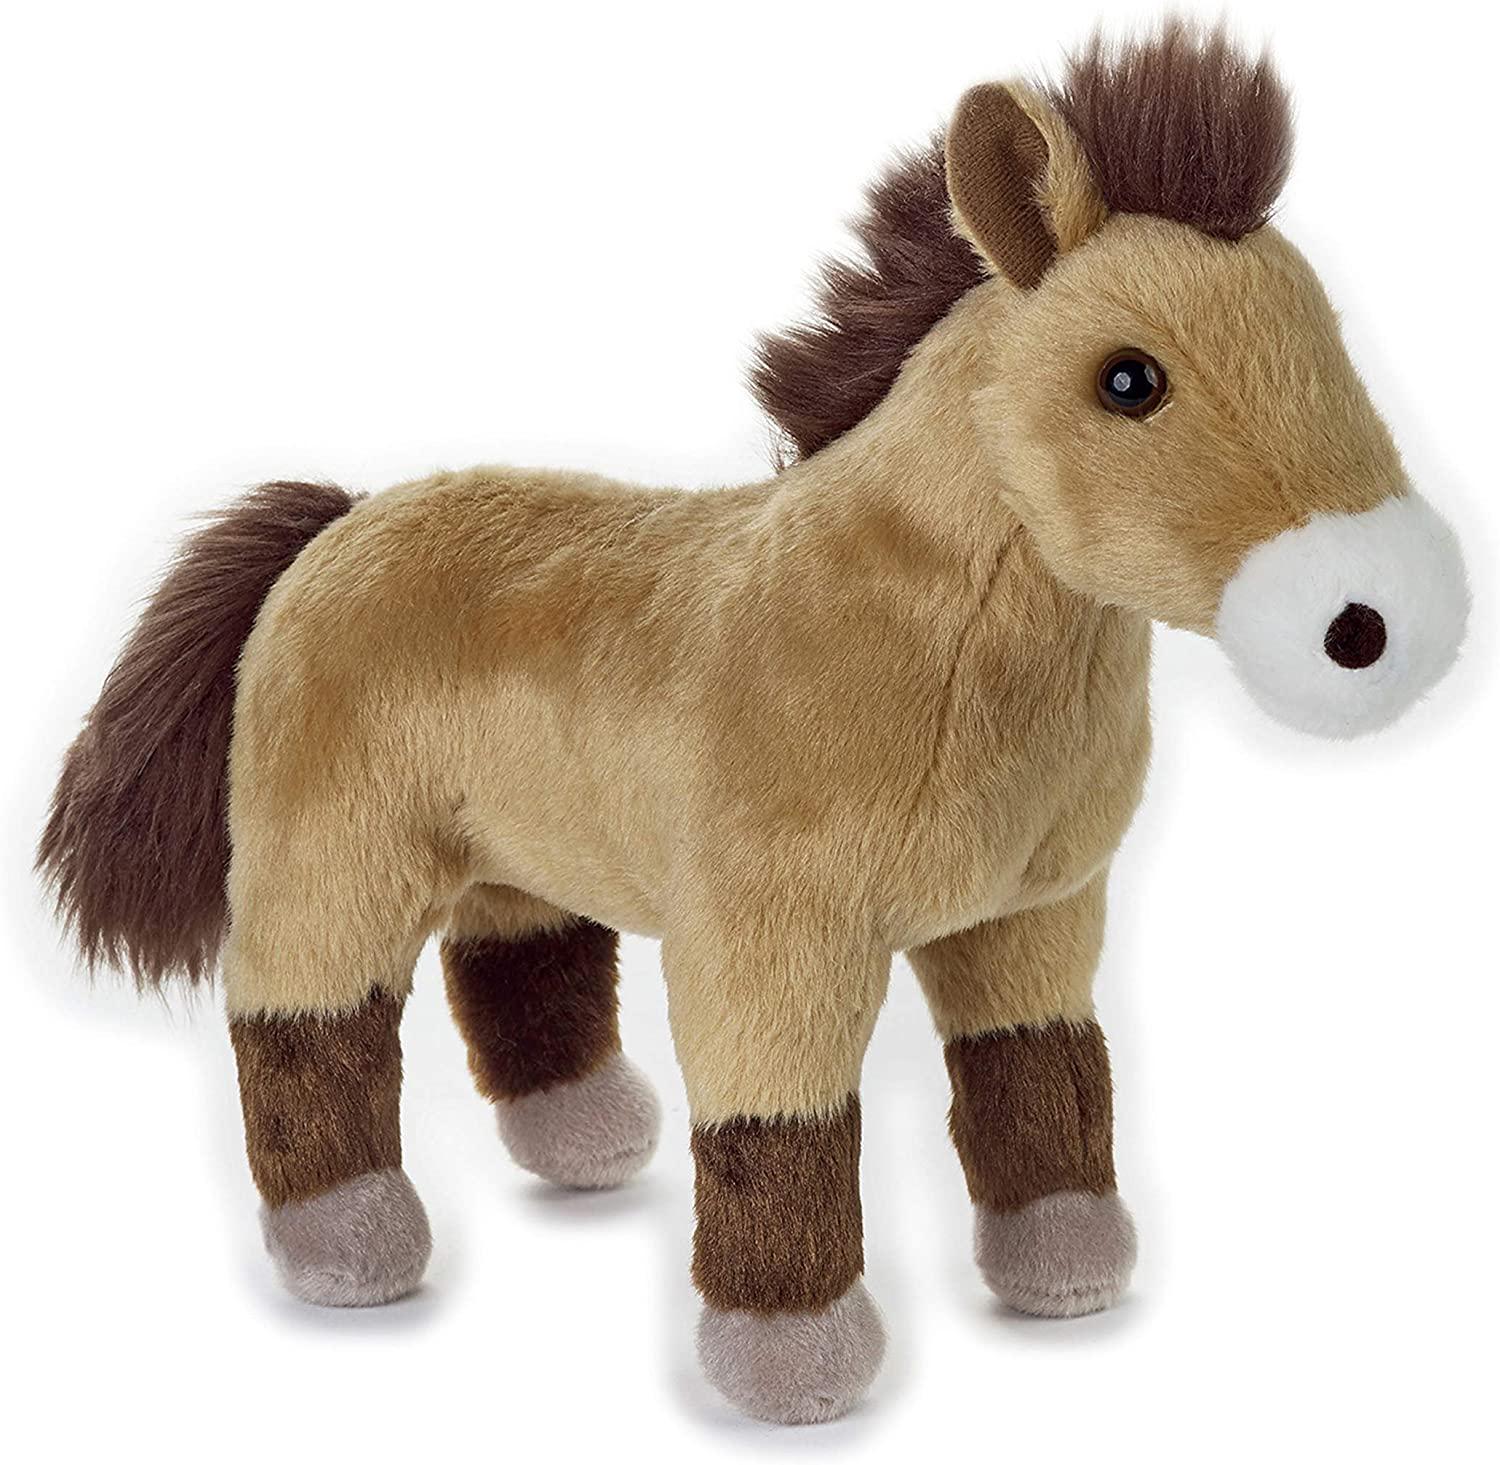 Lelly, Lelly 770860 National Geographic Basic Collection Horse Prz, Multi-Colour